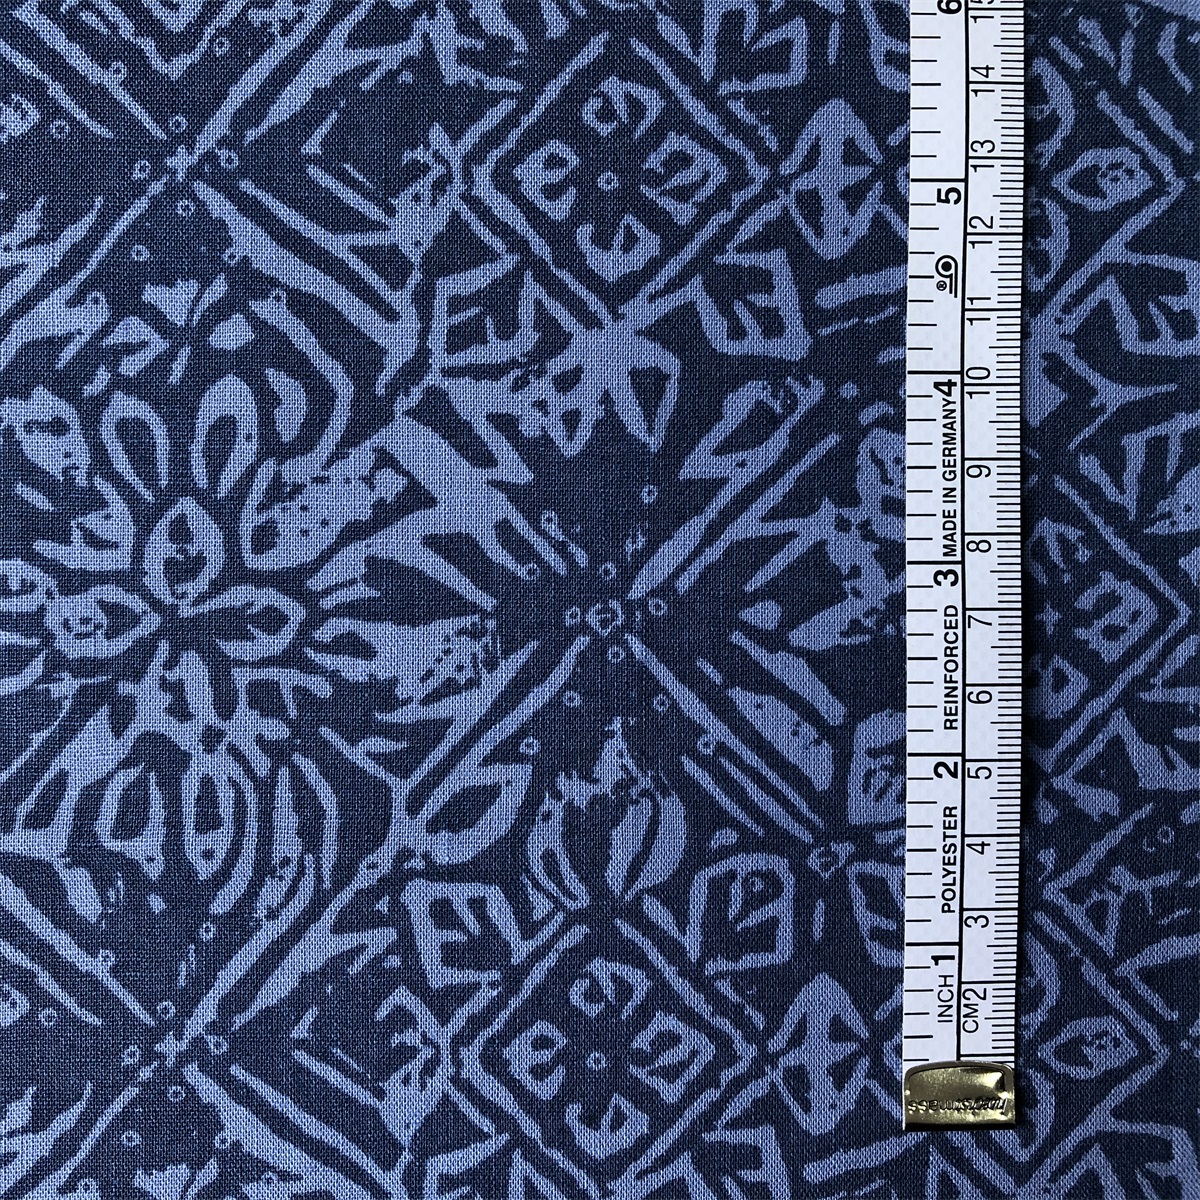 Linen Cotton Fabric by blended yarn for men's casual shirts 55% linen 45% cotton plain solid dyed printed woven fabric